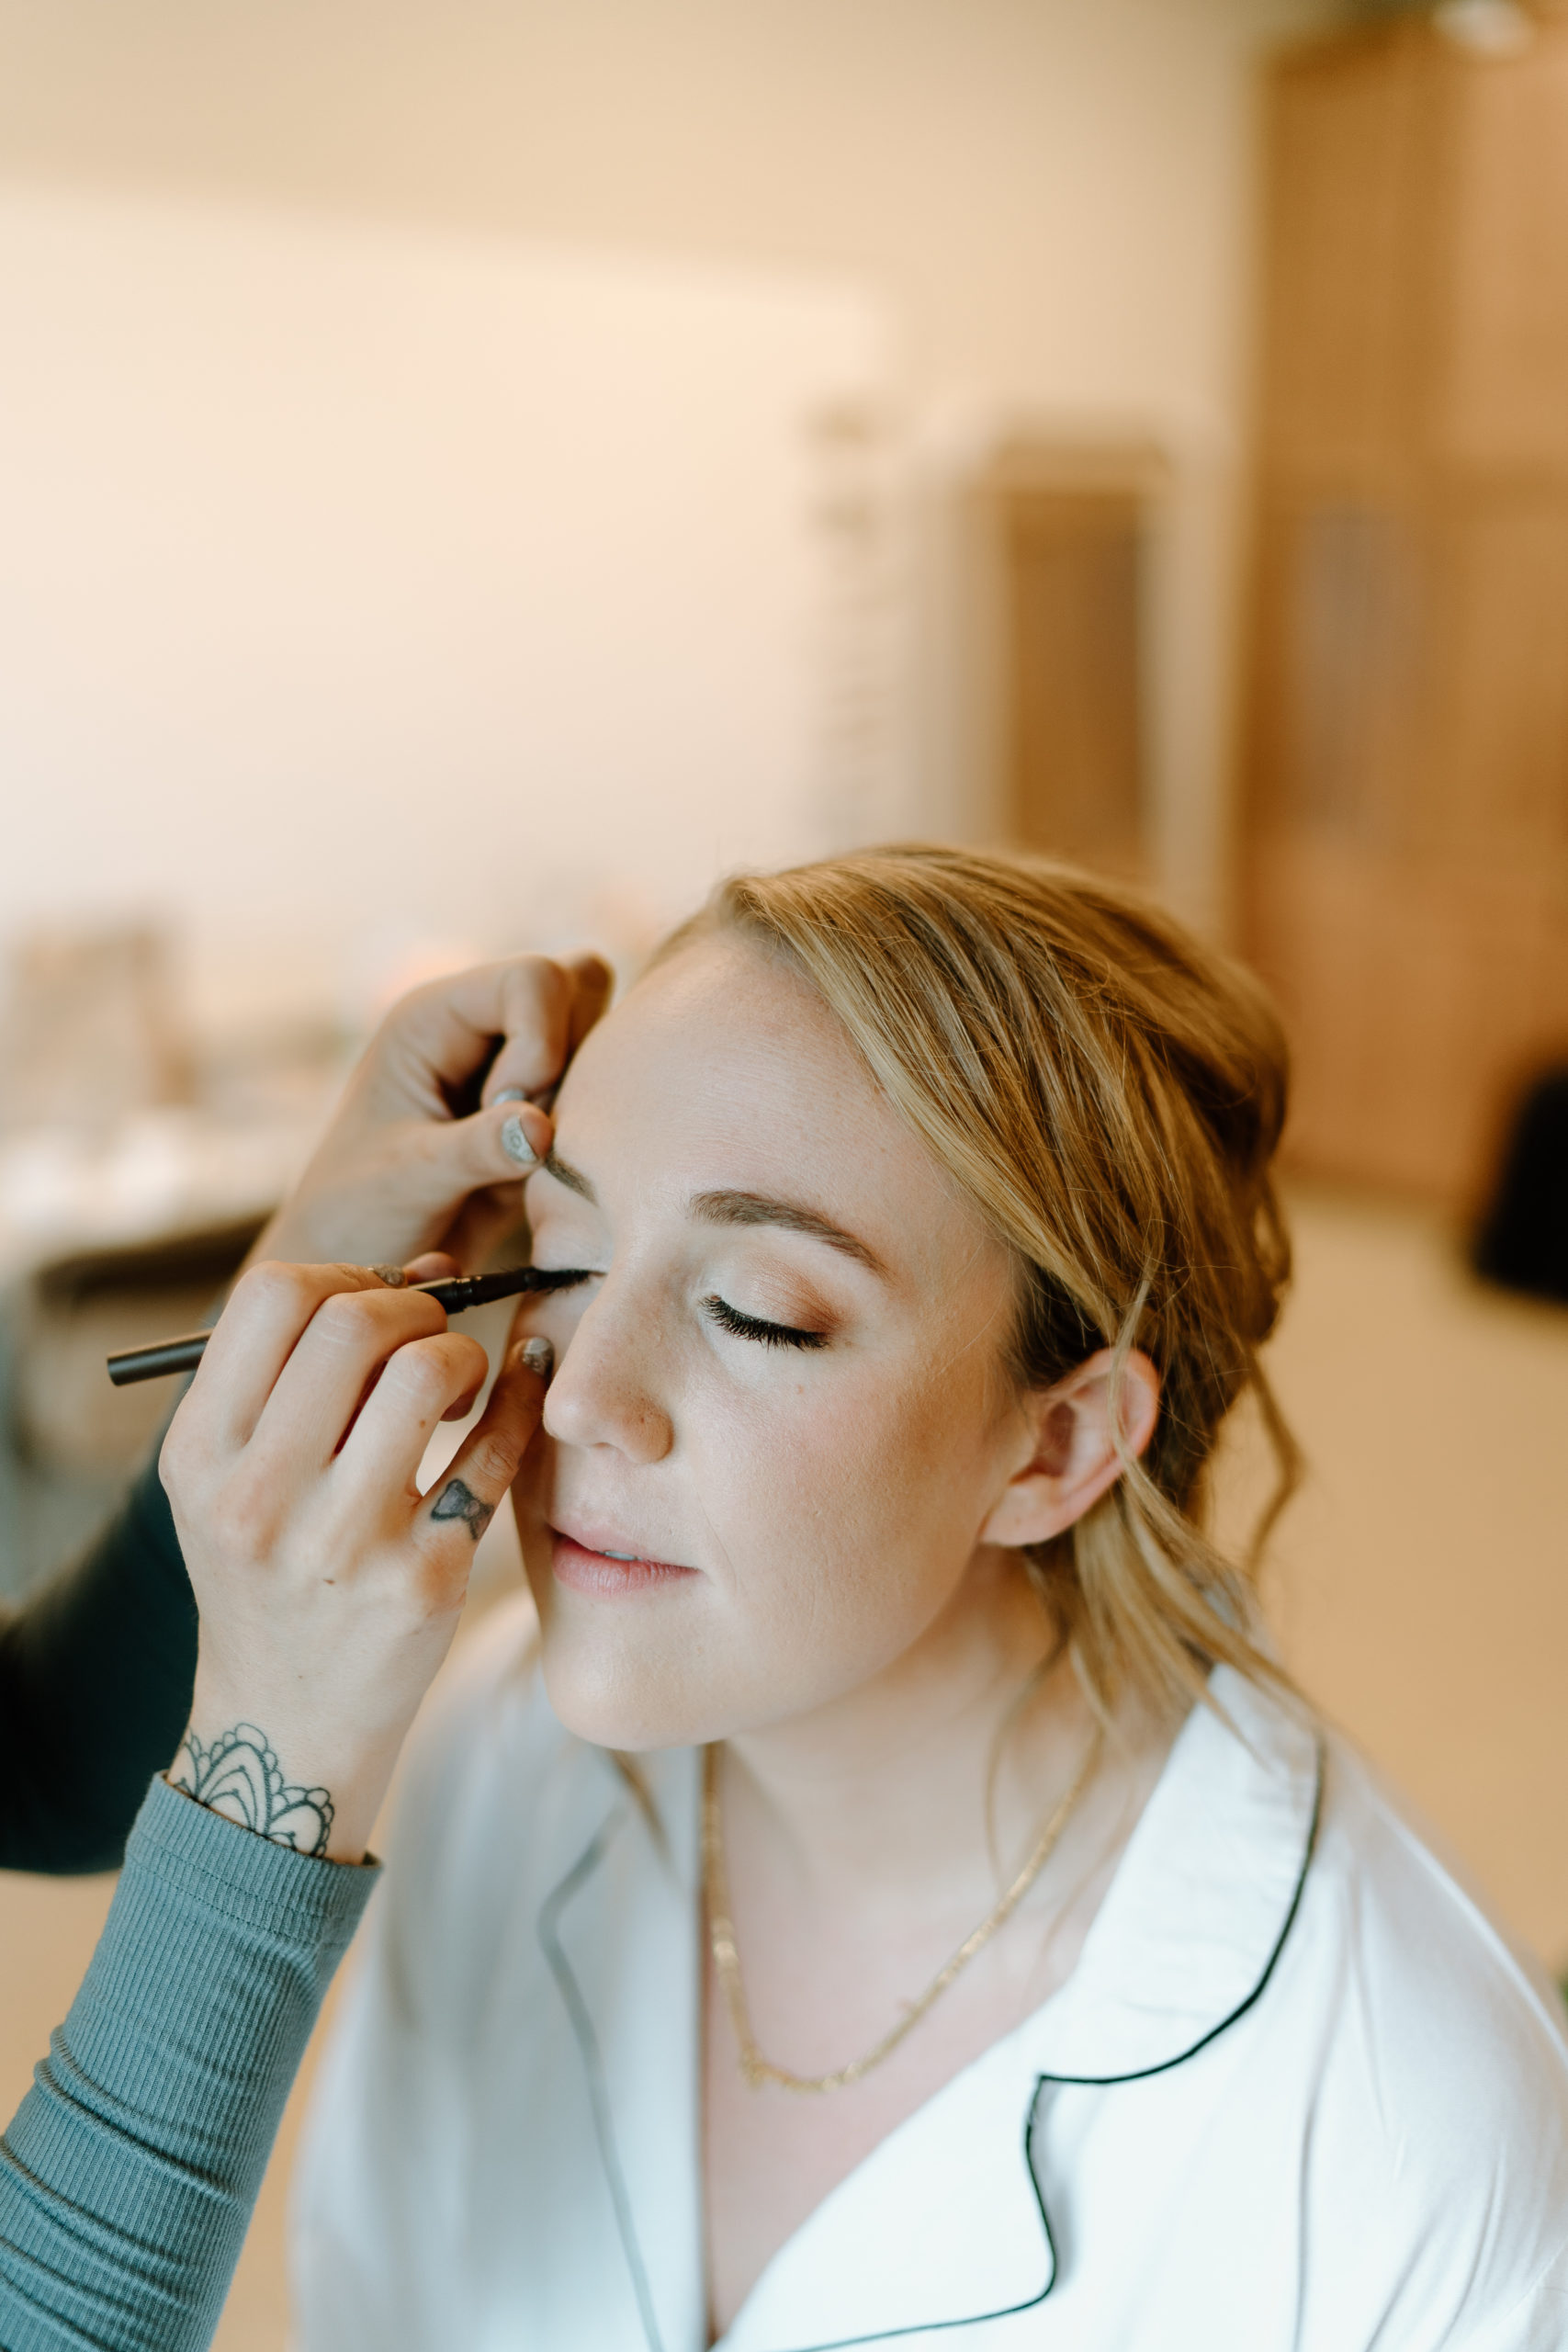 This is a picture of a bride getting her makeup done on her wedding day